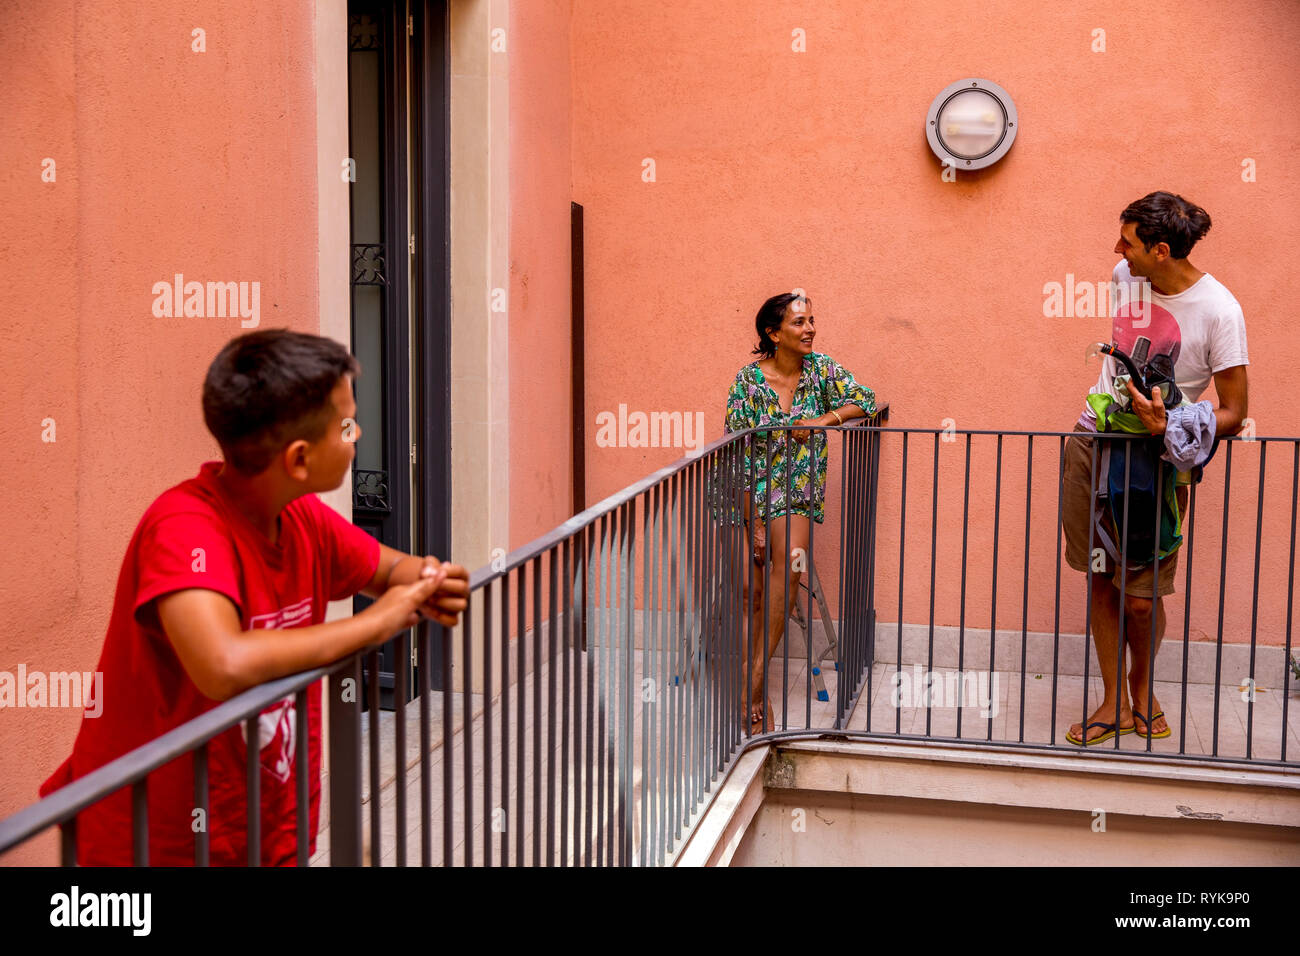 Child and adults on a balcony in Catania, Sicily (Italy). Stock Photo